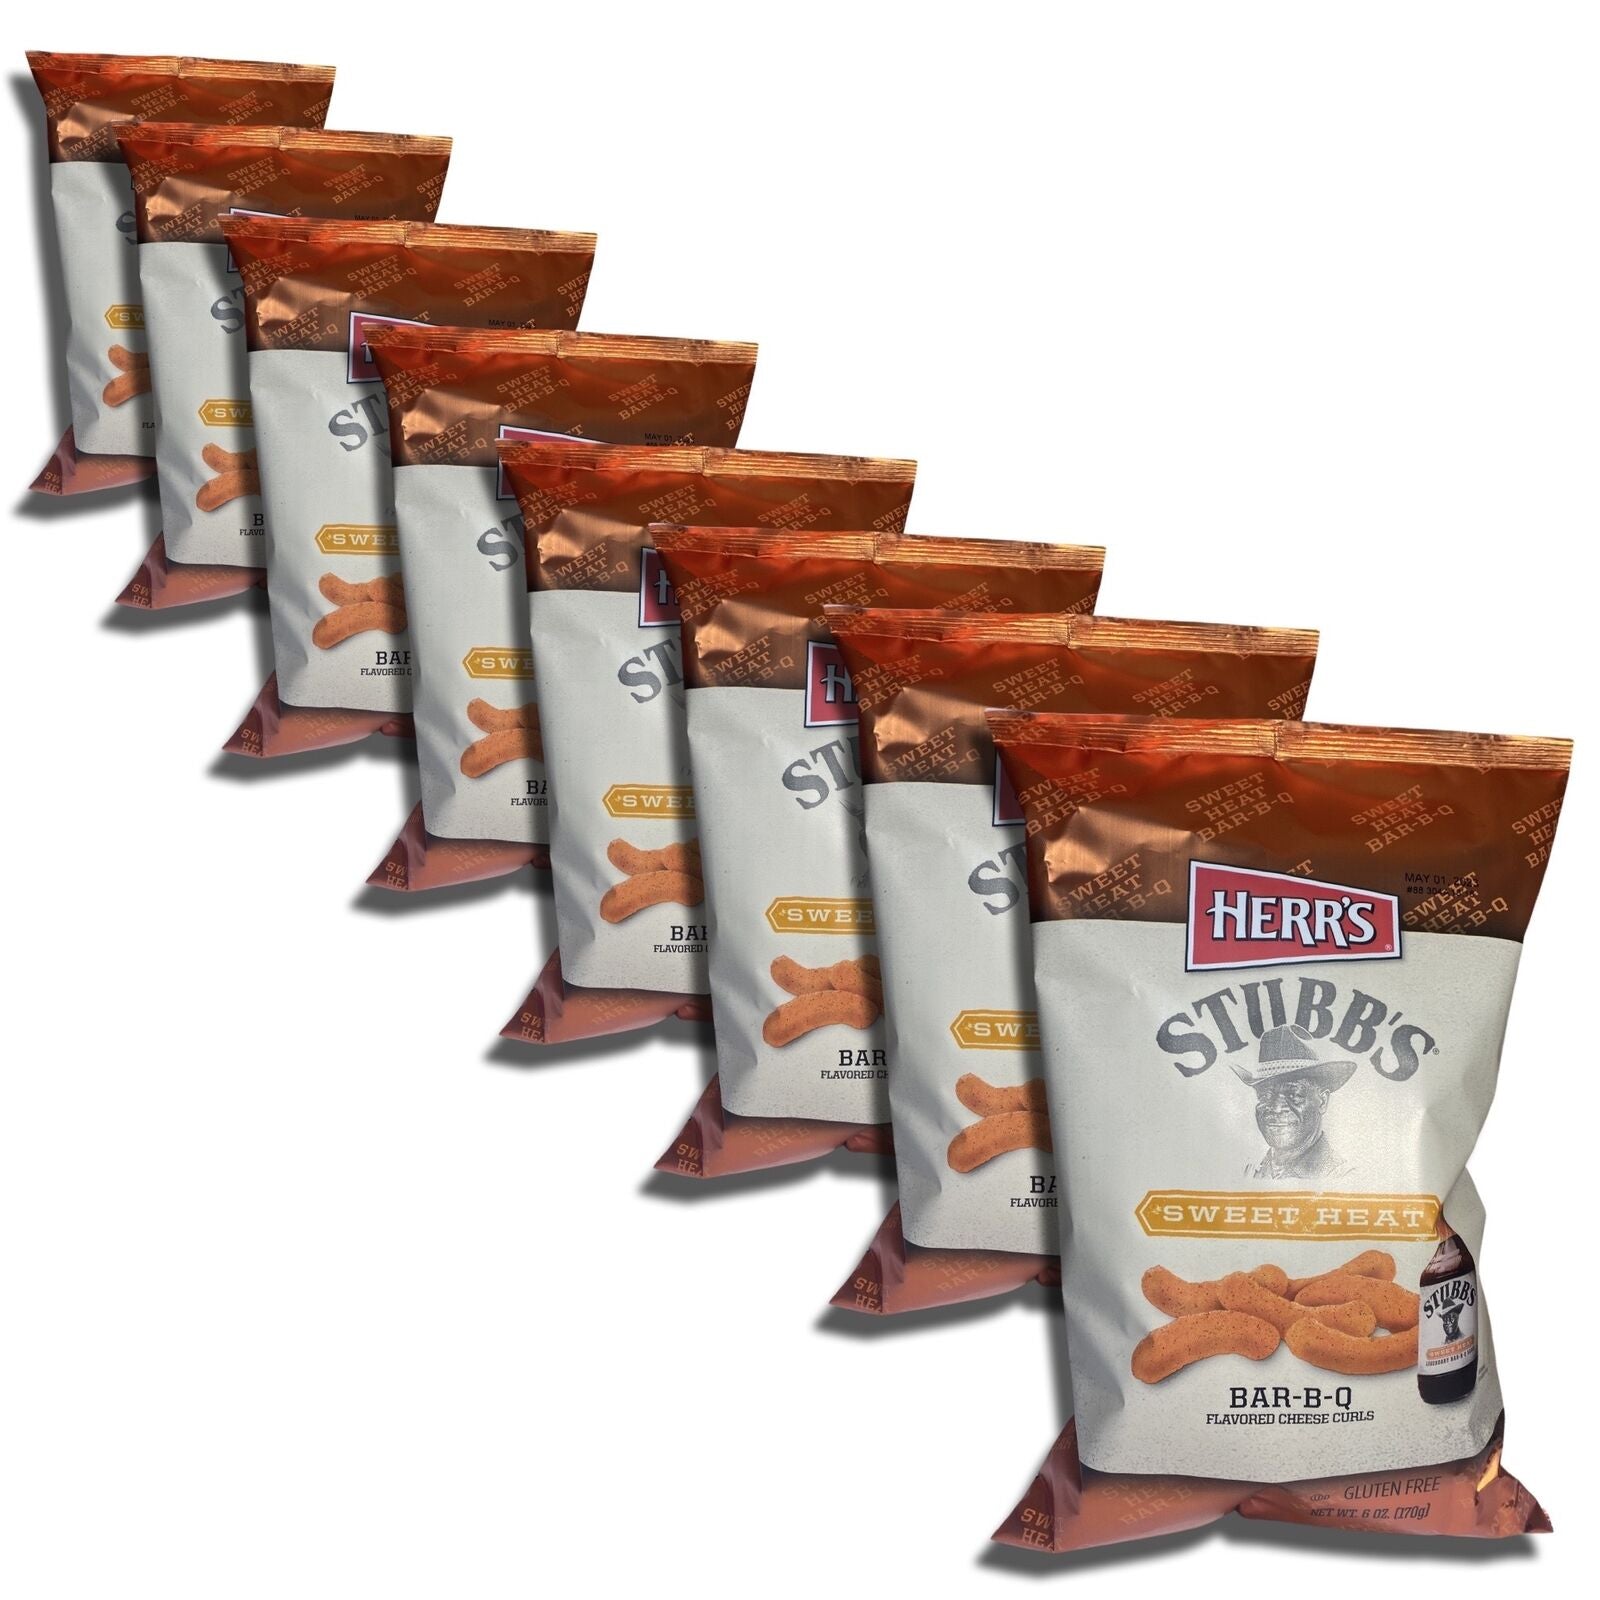 Tribeca Curations | Sweet Heat Bar-B-Q Cheese Curls by Herr'S Bundled By